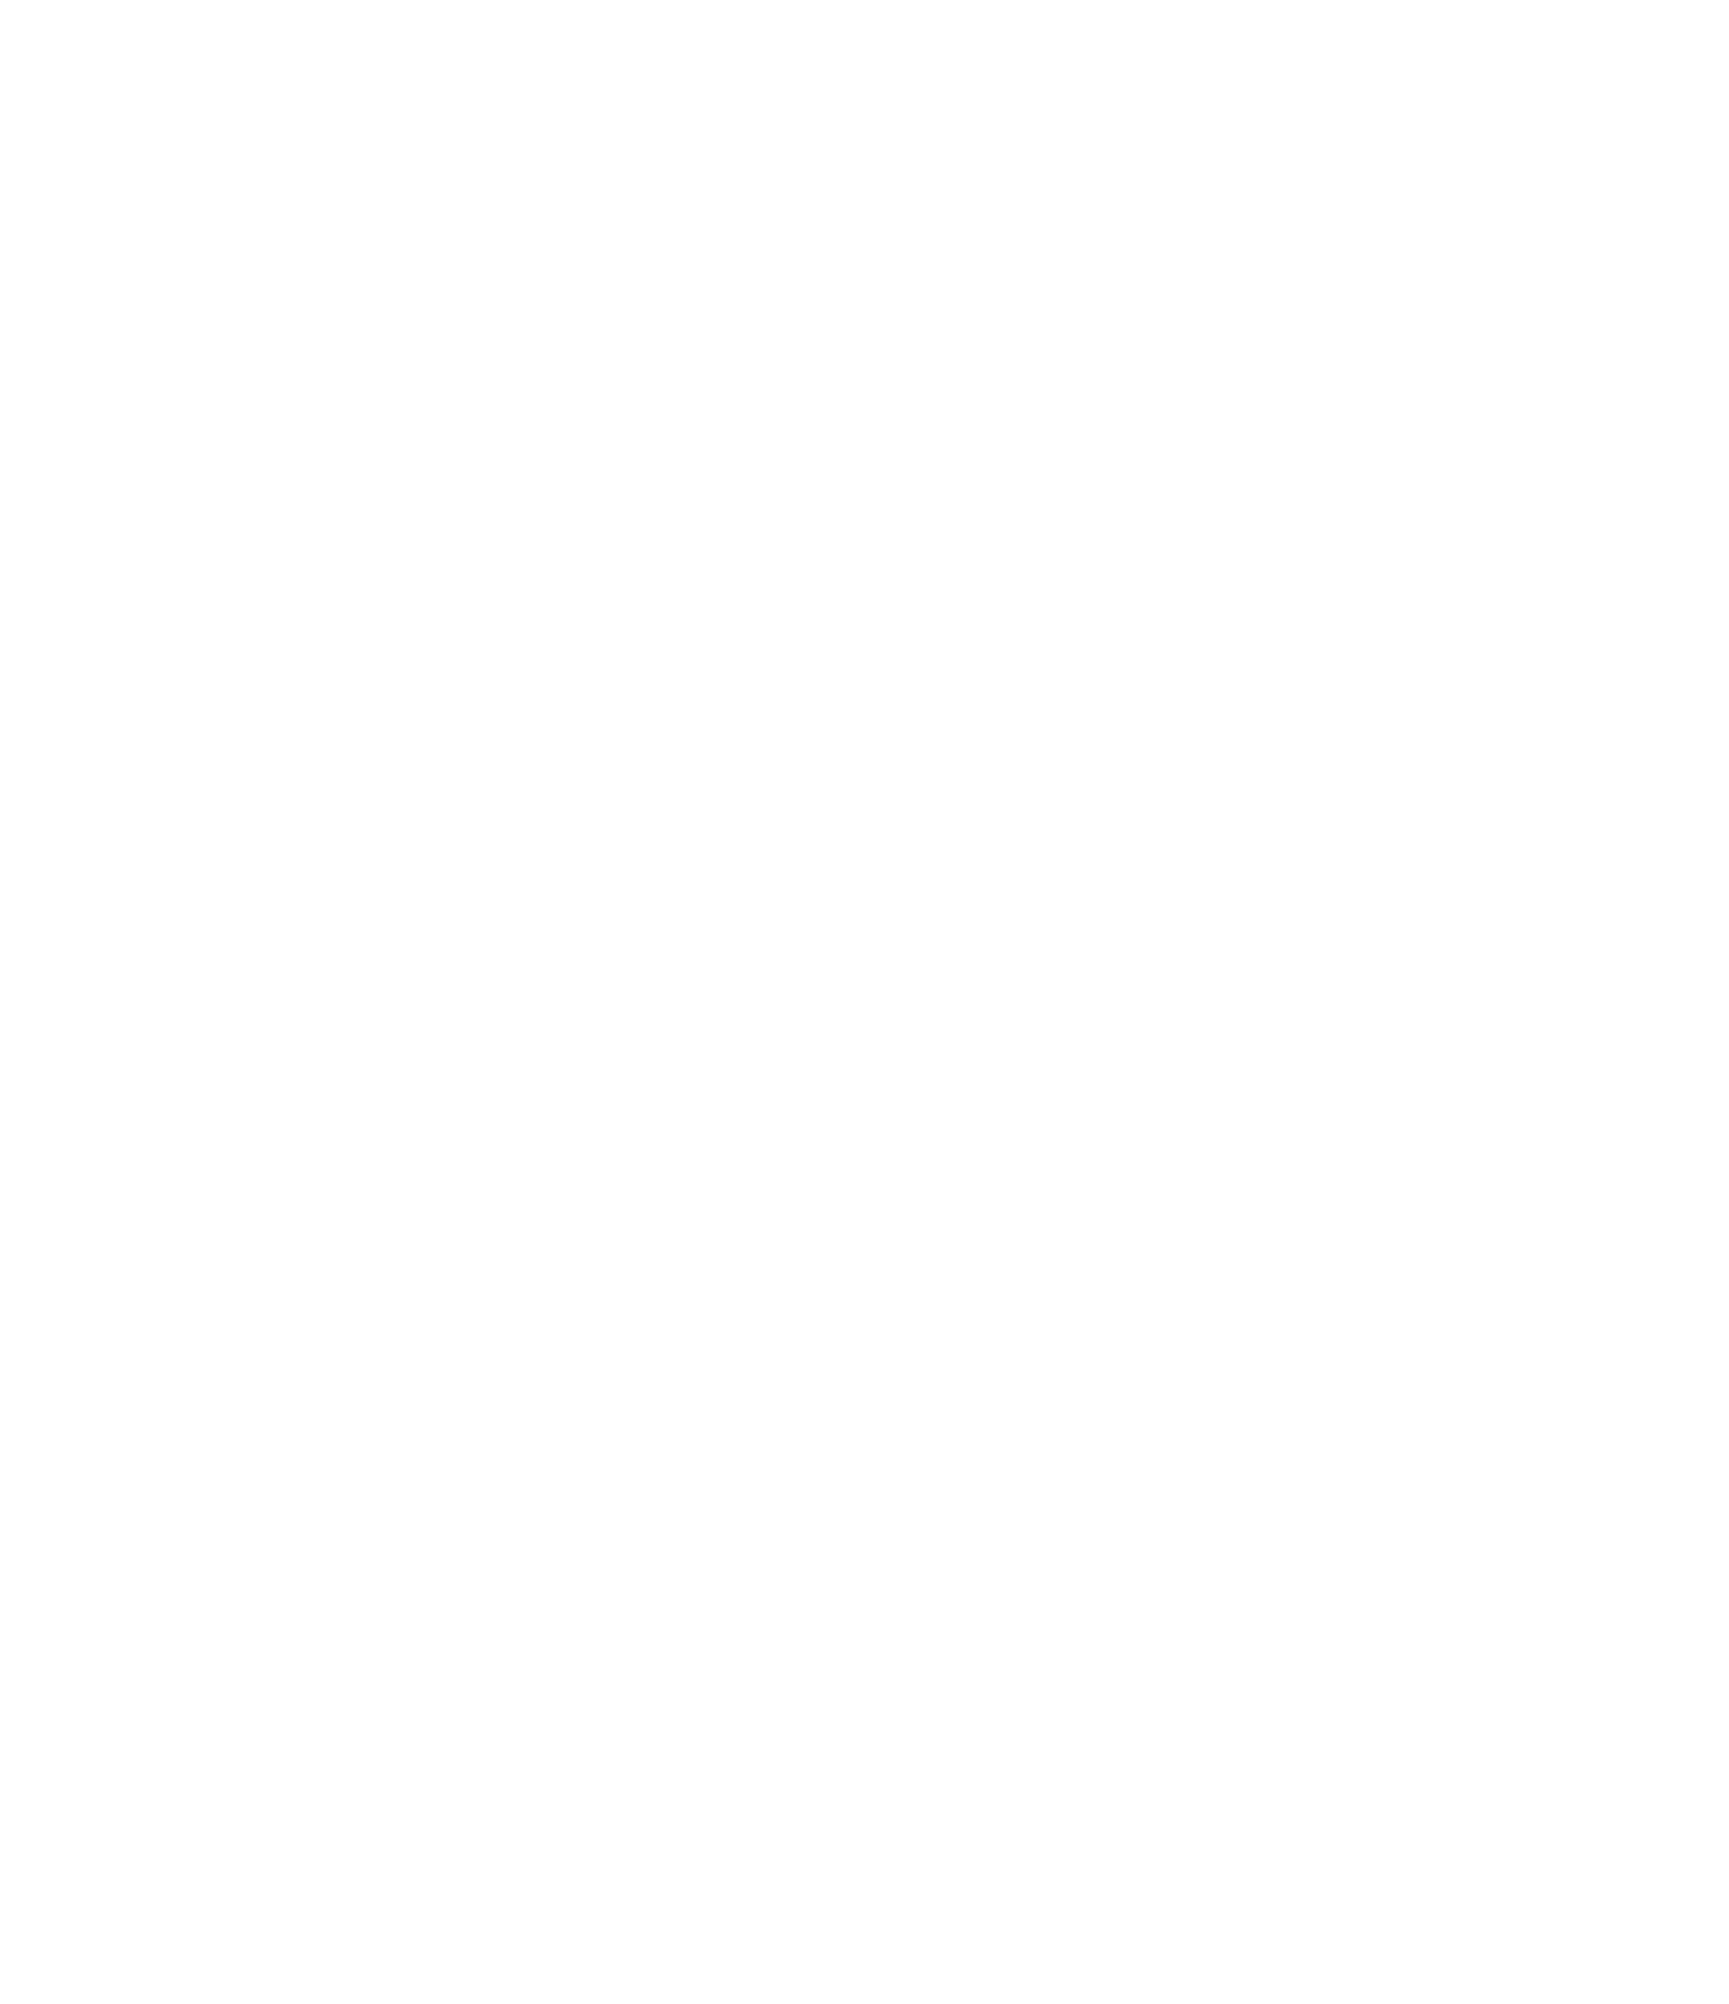 Showstoppers logo